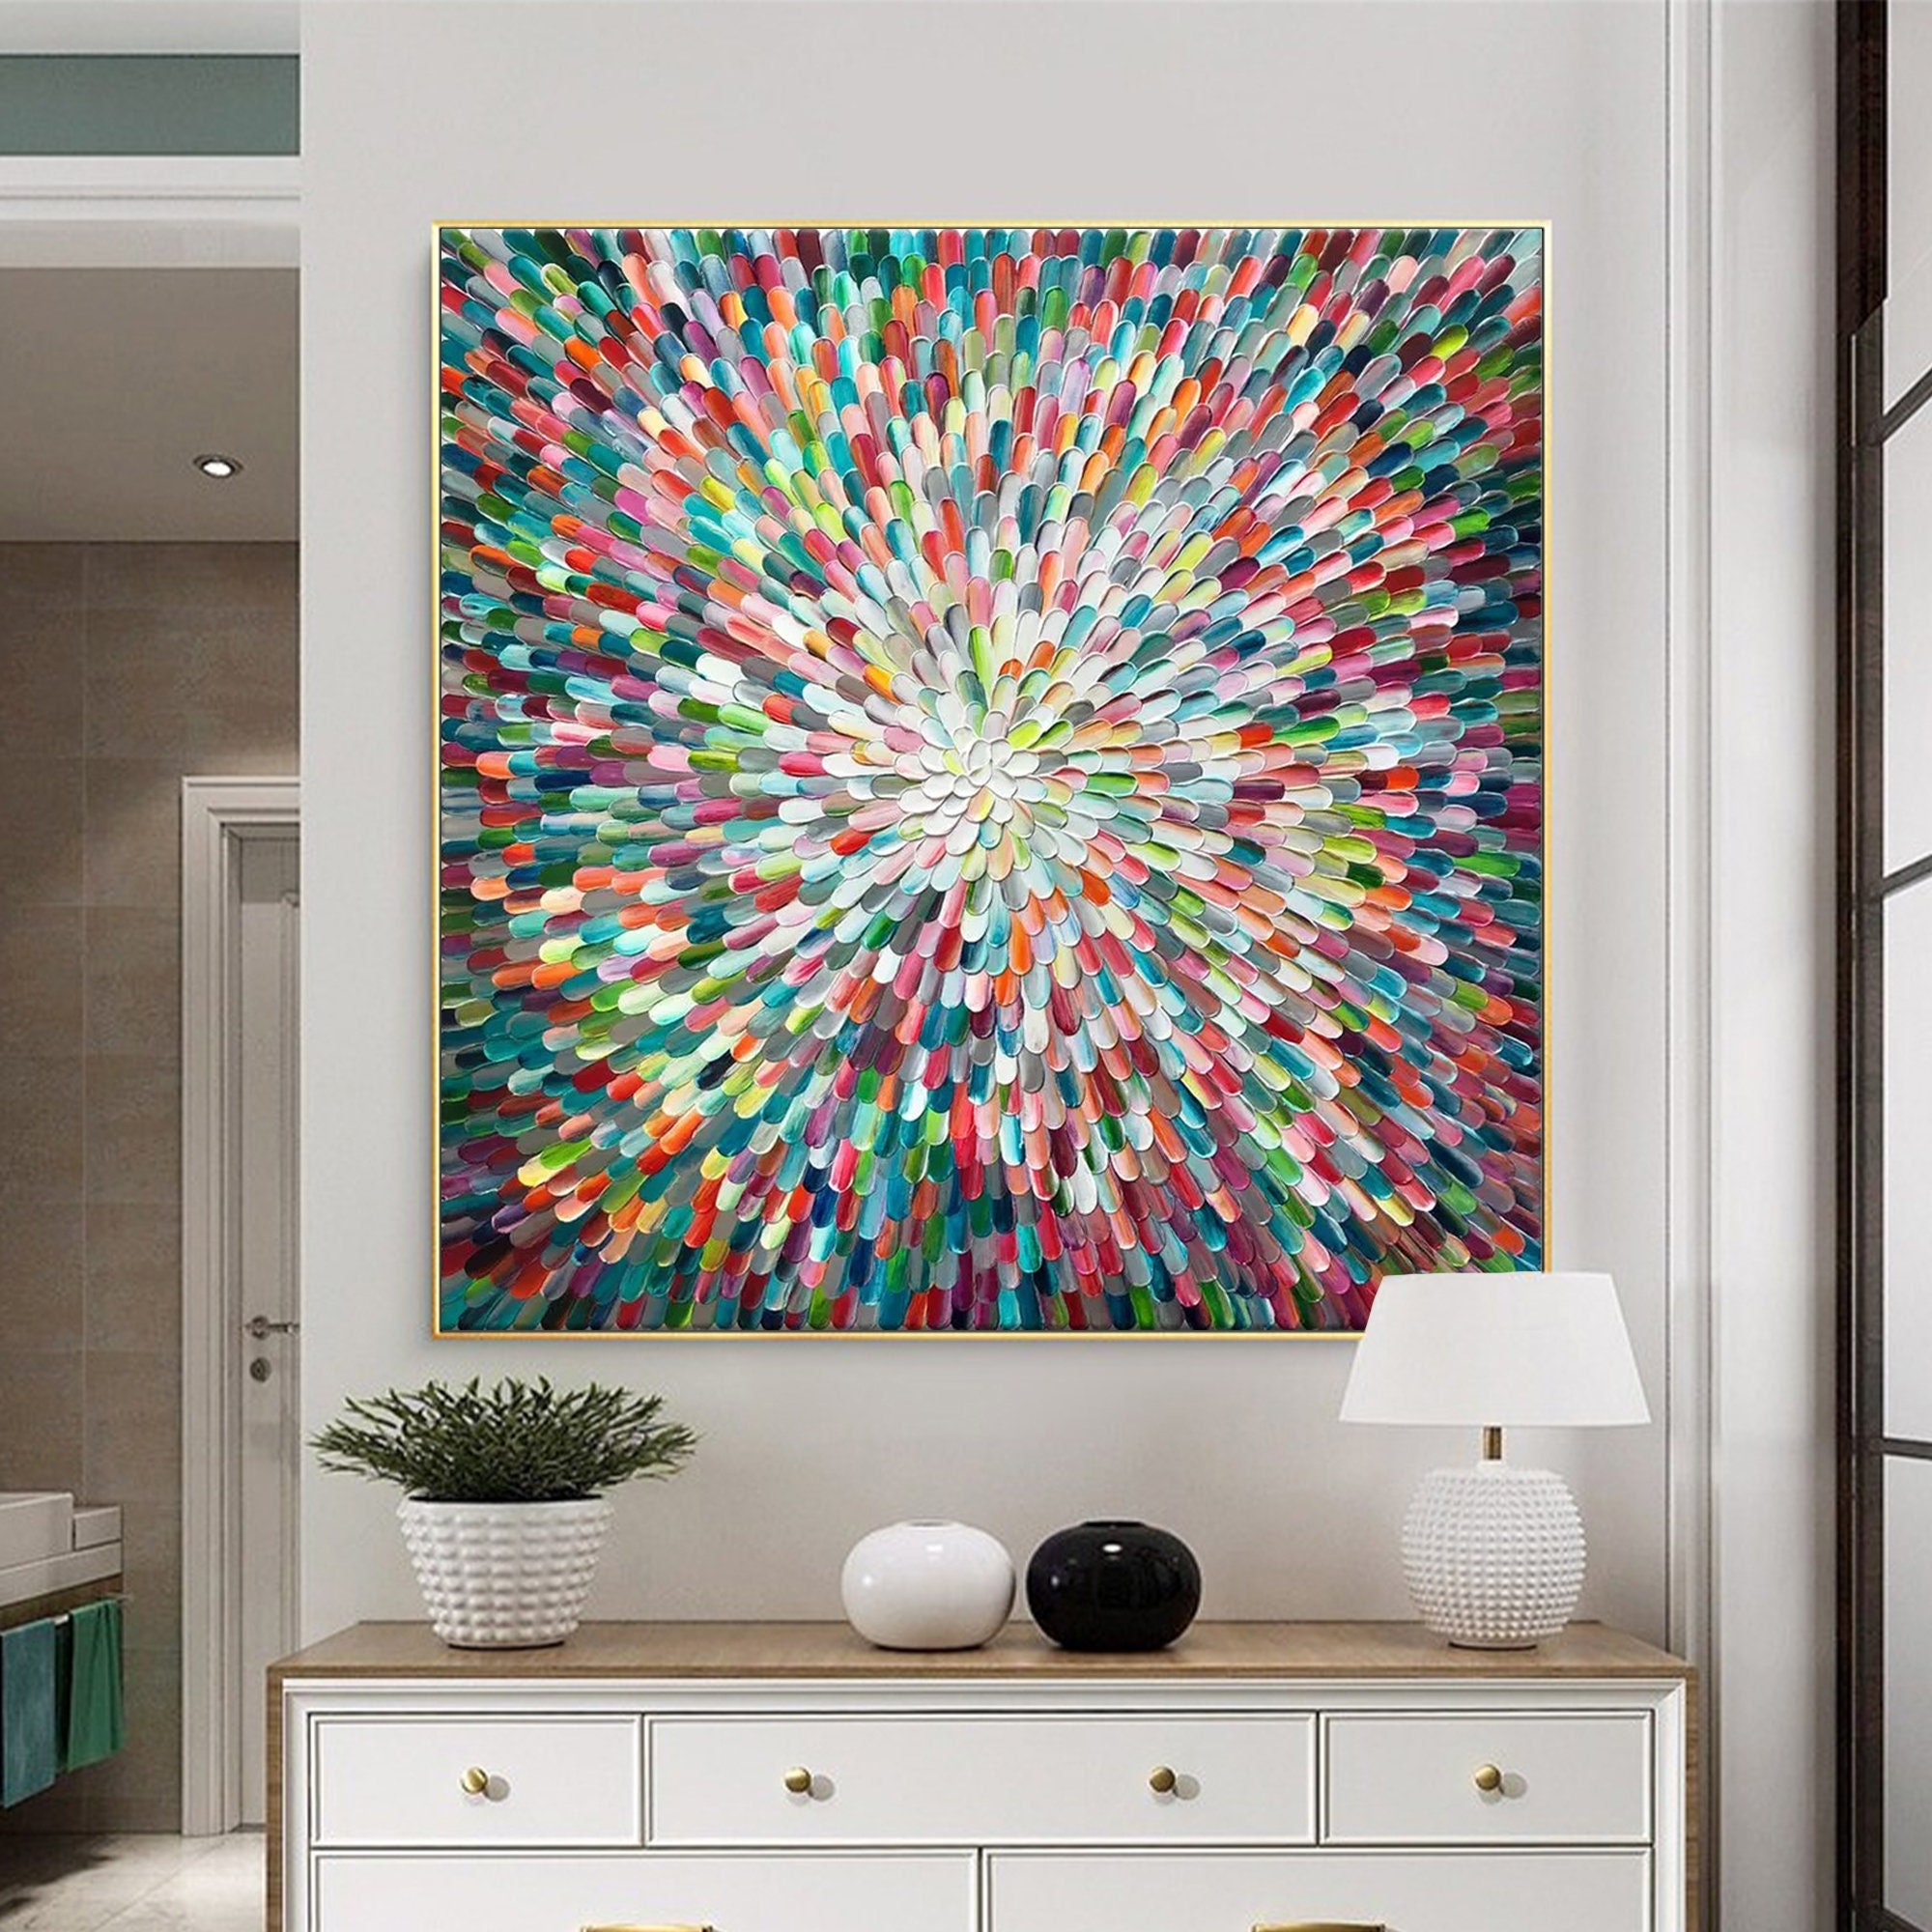 Original Abstract Painting, Large Wall Etsy Art Wall Hand Handmade Home Flower Decor, Canvas, Office - Decor, Painted on Wall Art,colorful Painting